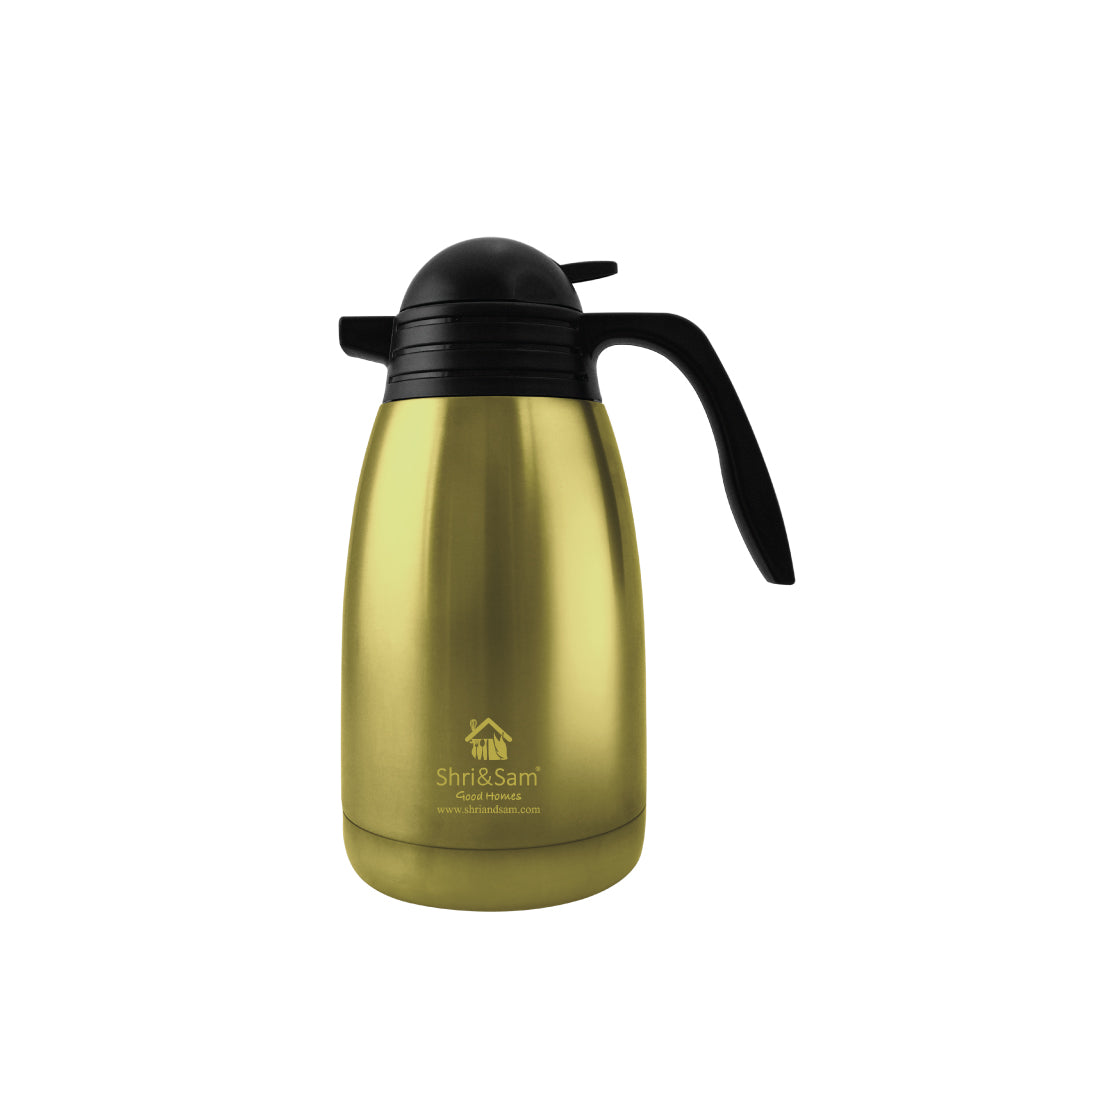 Stainless Steel Triply Vacuum Insulated Jug with Gold PVD Coating Flagon